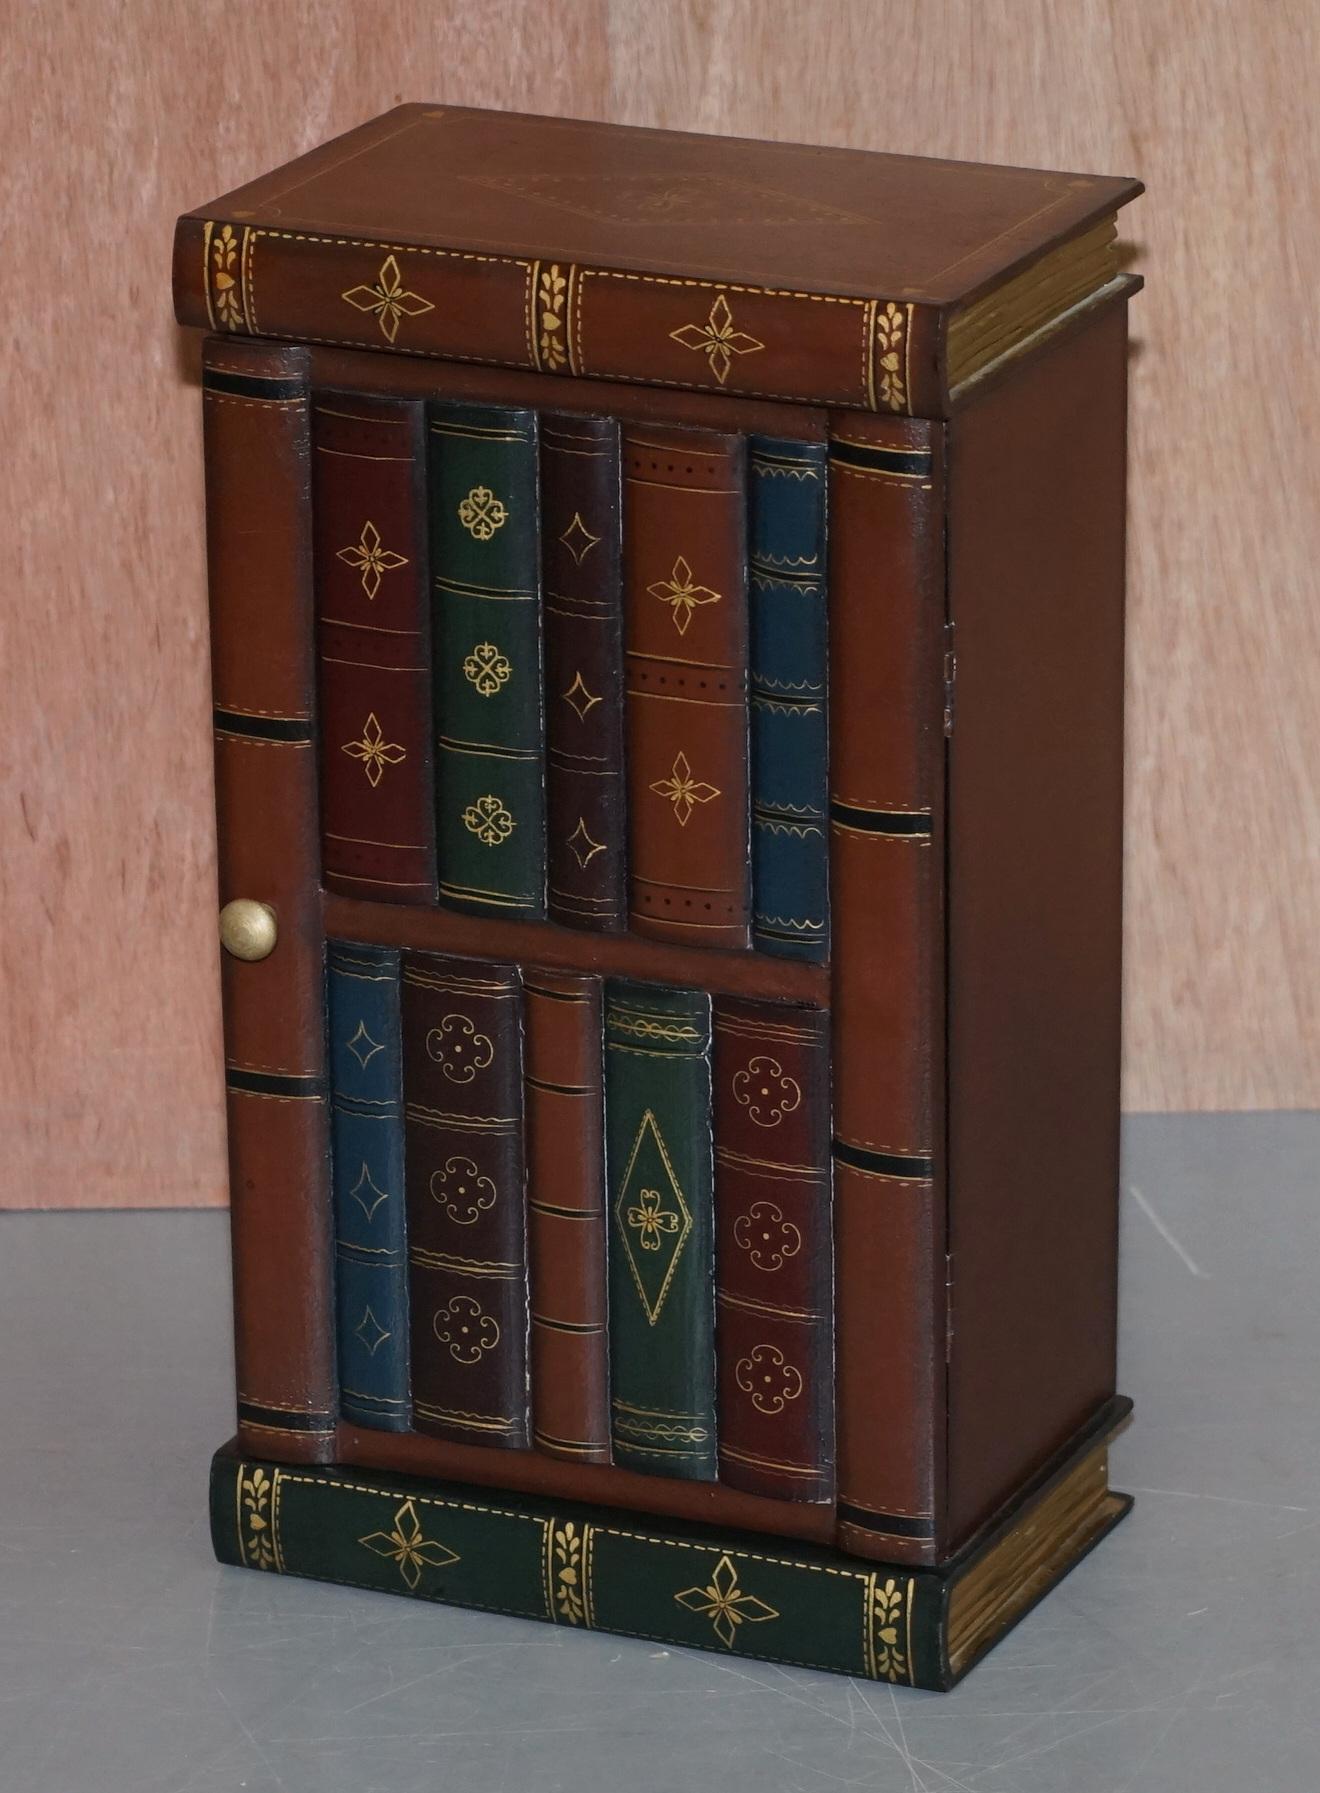 We are delighted to offer for sale this lovely pair of small vintage faux book library or study small side tables

A good looking and well made pair, the faux book style dates back to the early Victorian era and was a great way to hide precious